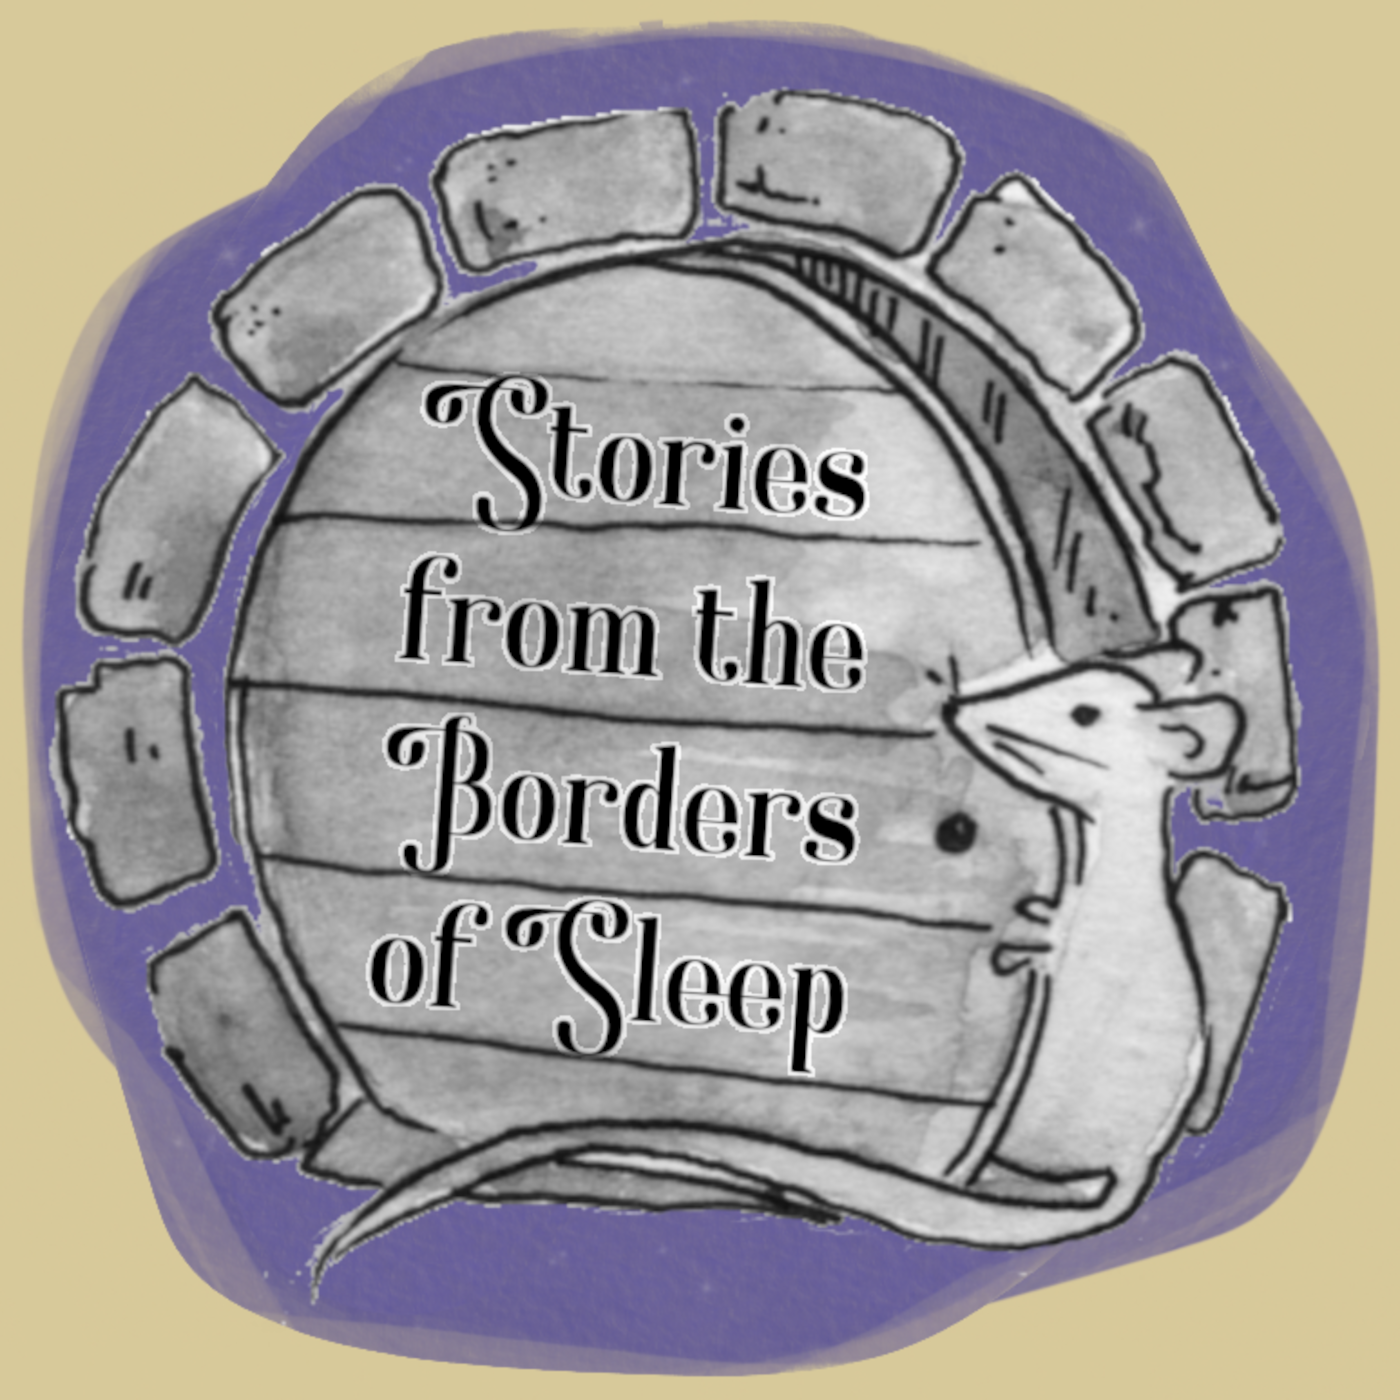 Stories from the Borders of Sleep